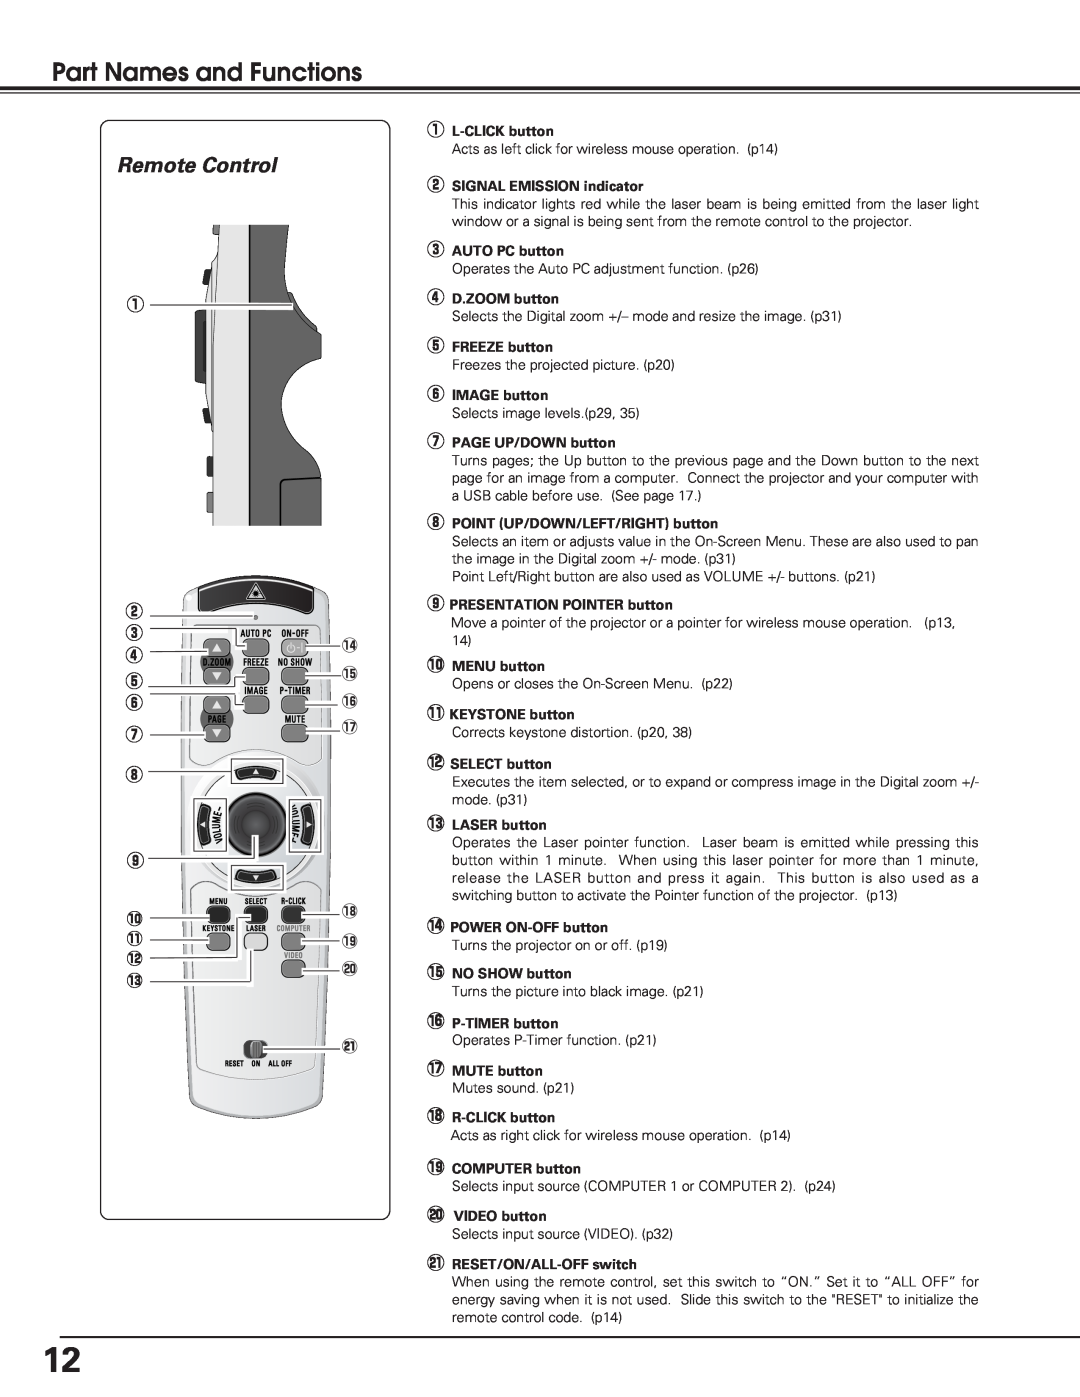 Eiki lc-sb15 owner manual Remote Control, Part Names and Functions 